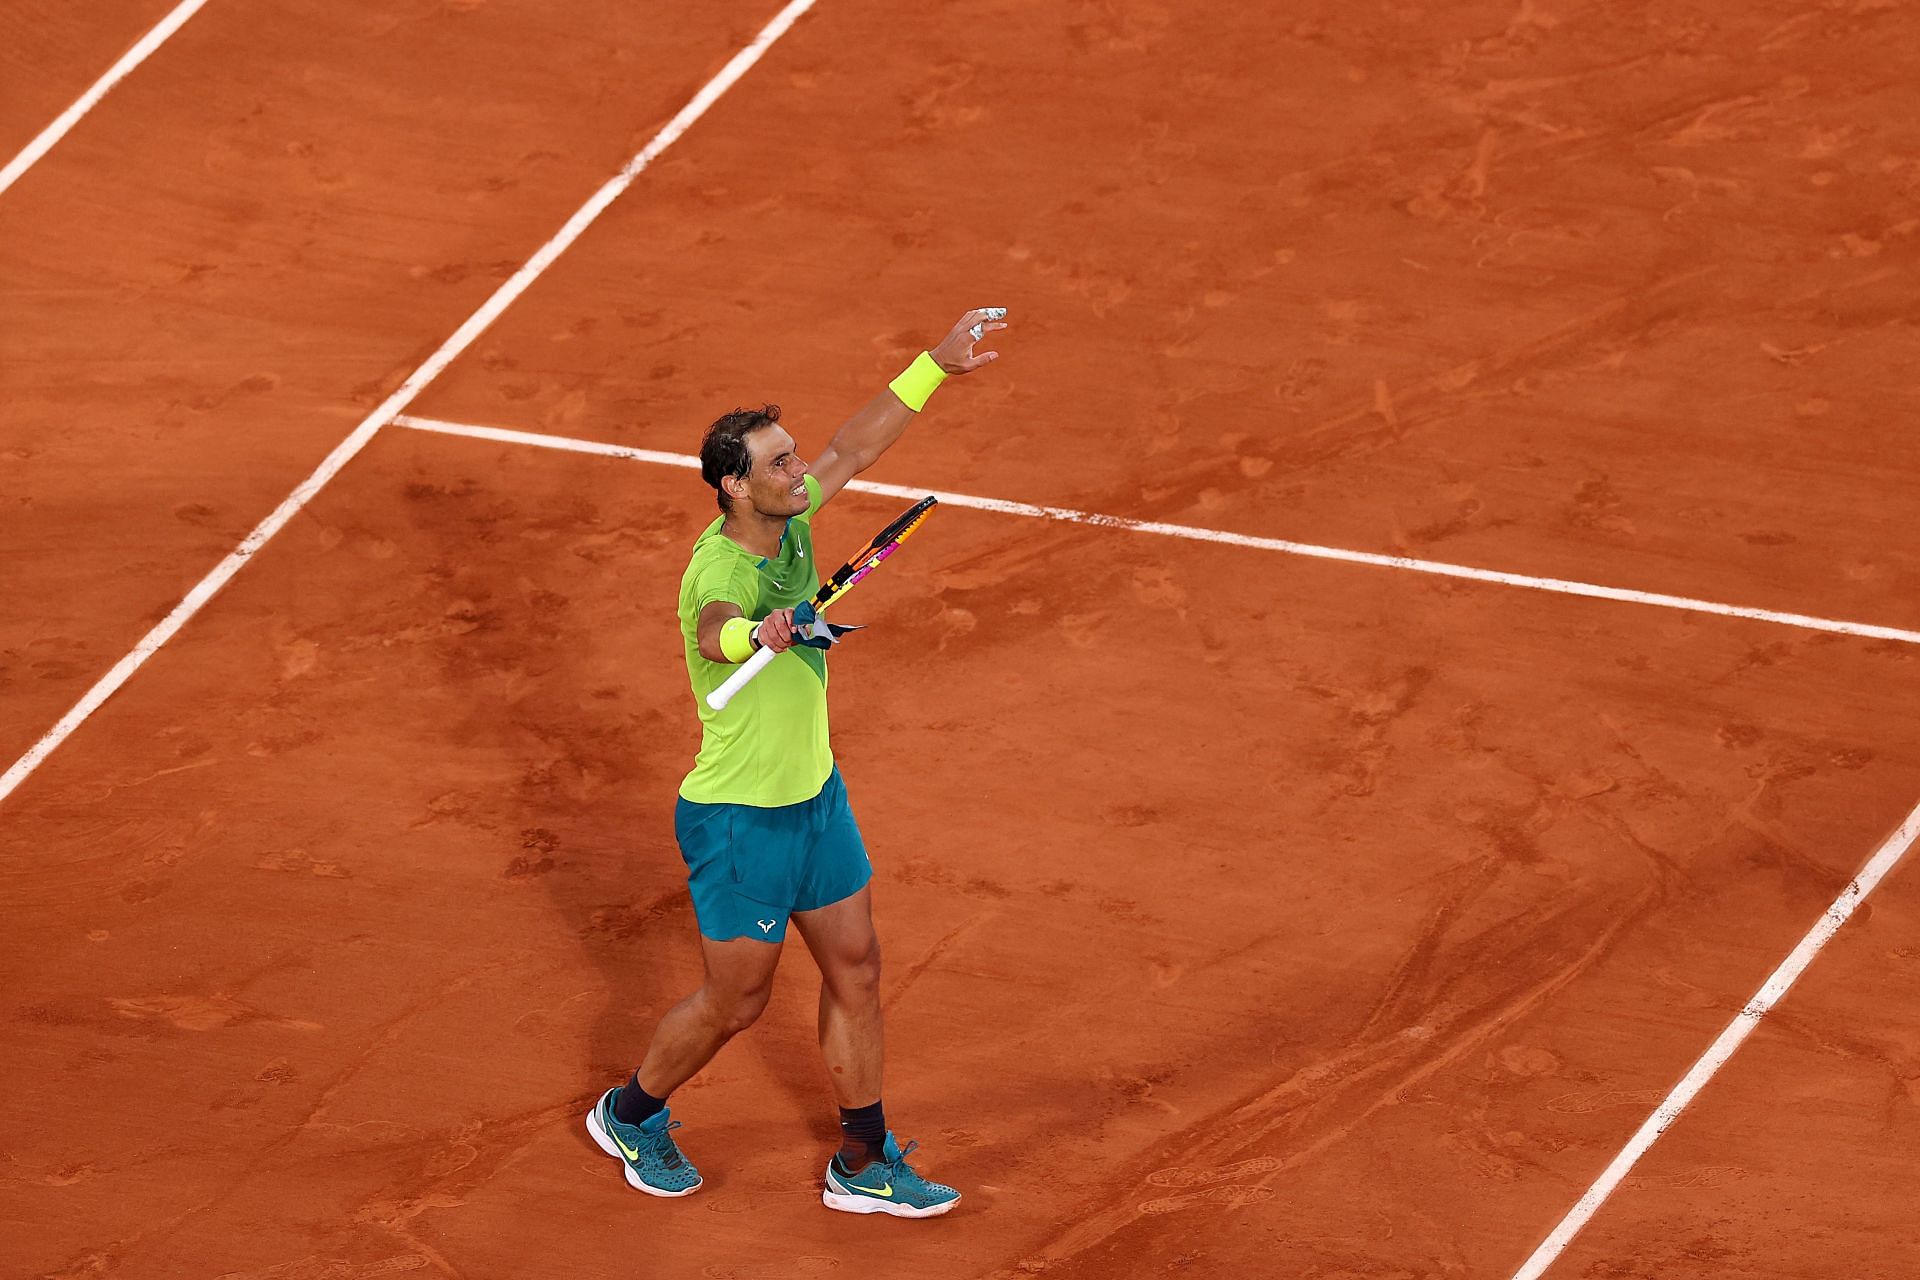 Rafael Nadal reached the third round of the French Open